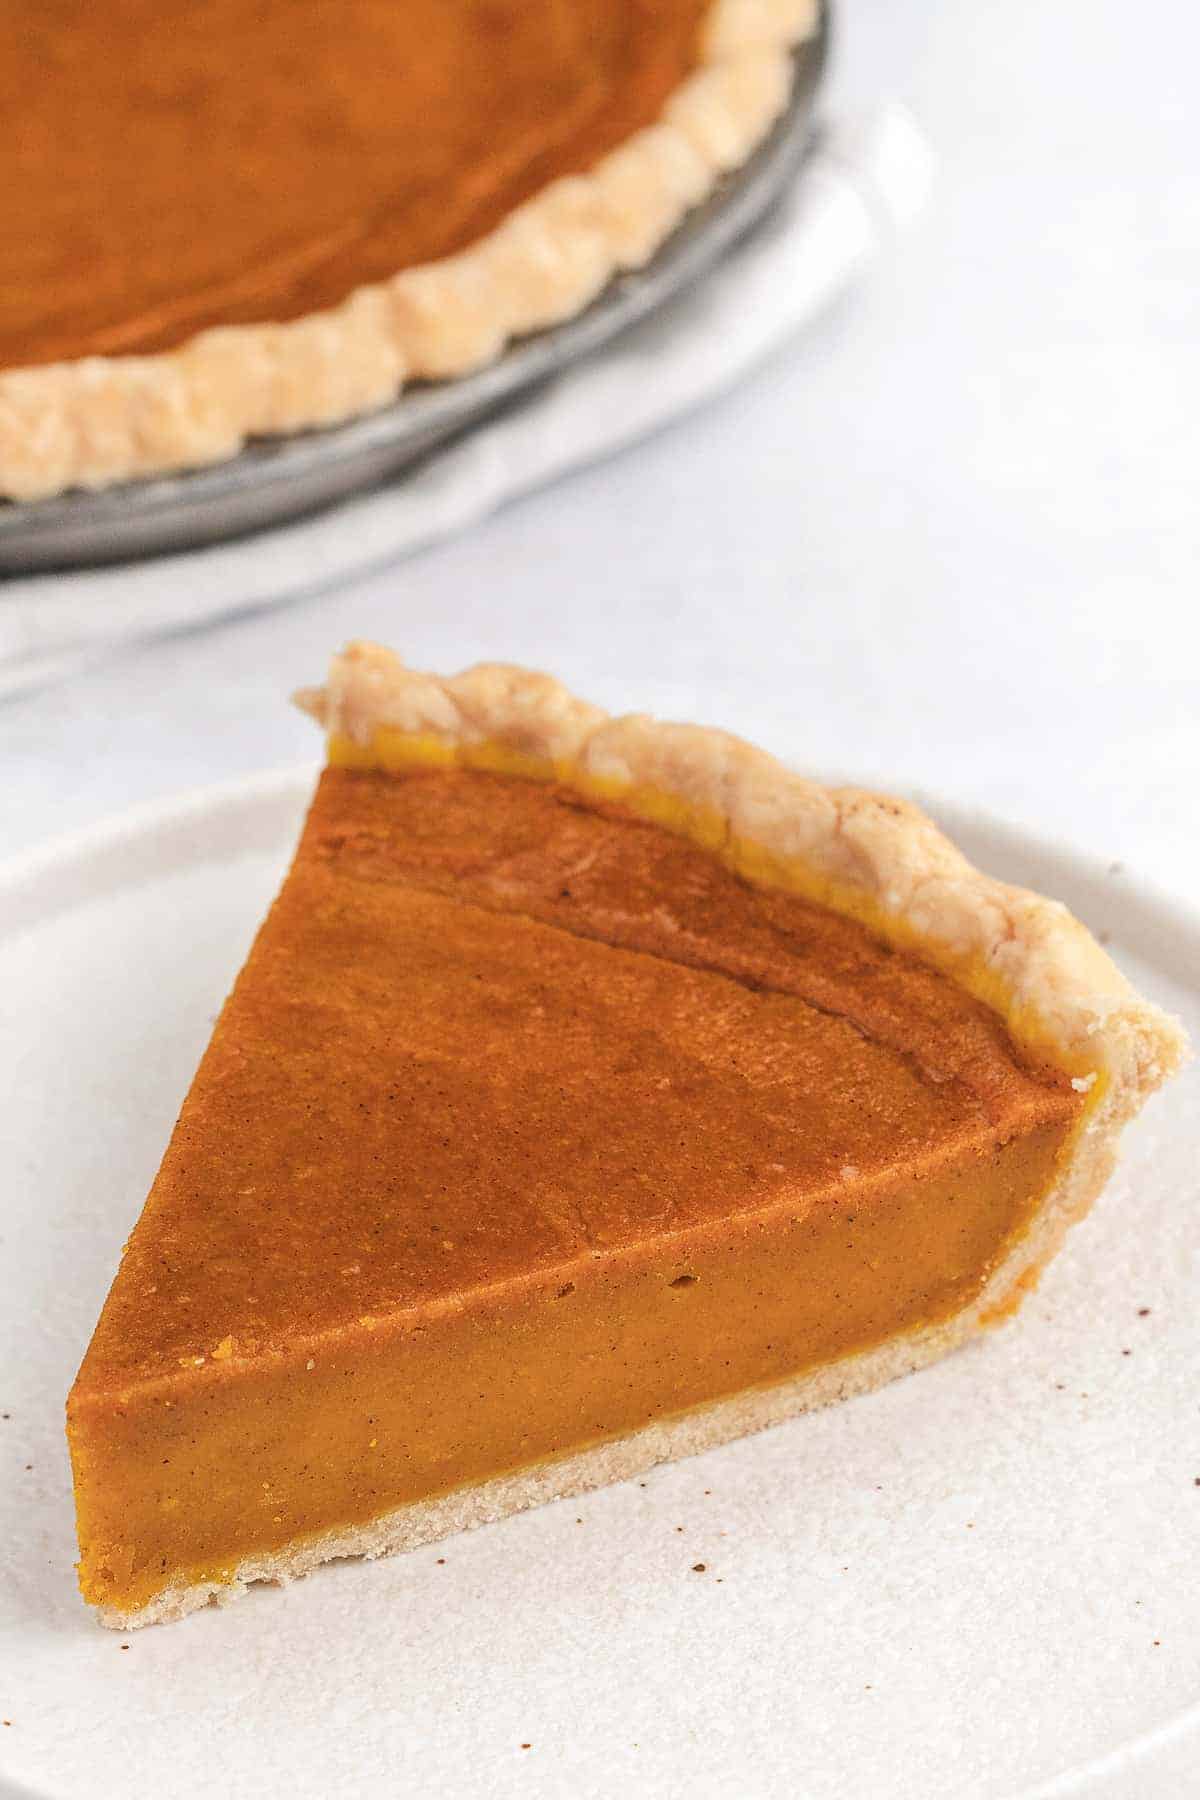 An overhead view of a slice of vegan pumpkin pie placed on a white plate.